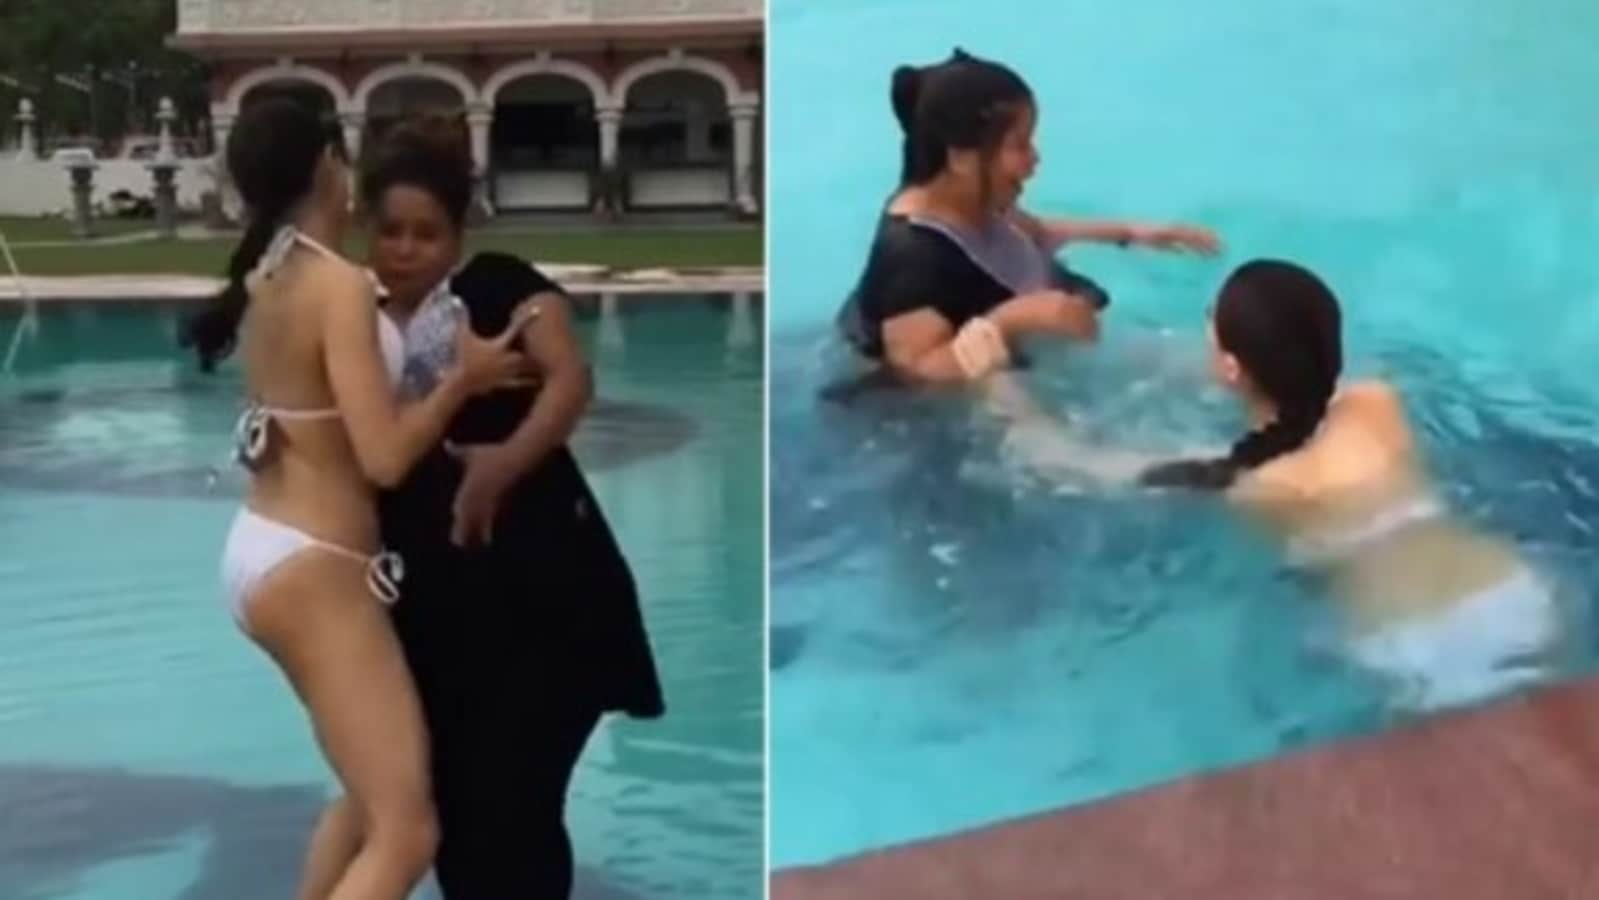 Sara pushes spot girl into pool in 'worst prank' video, people say 'not  funny' | Bollywood - Hindustan Times